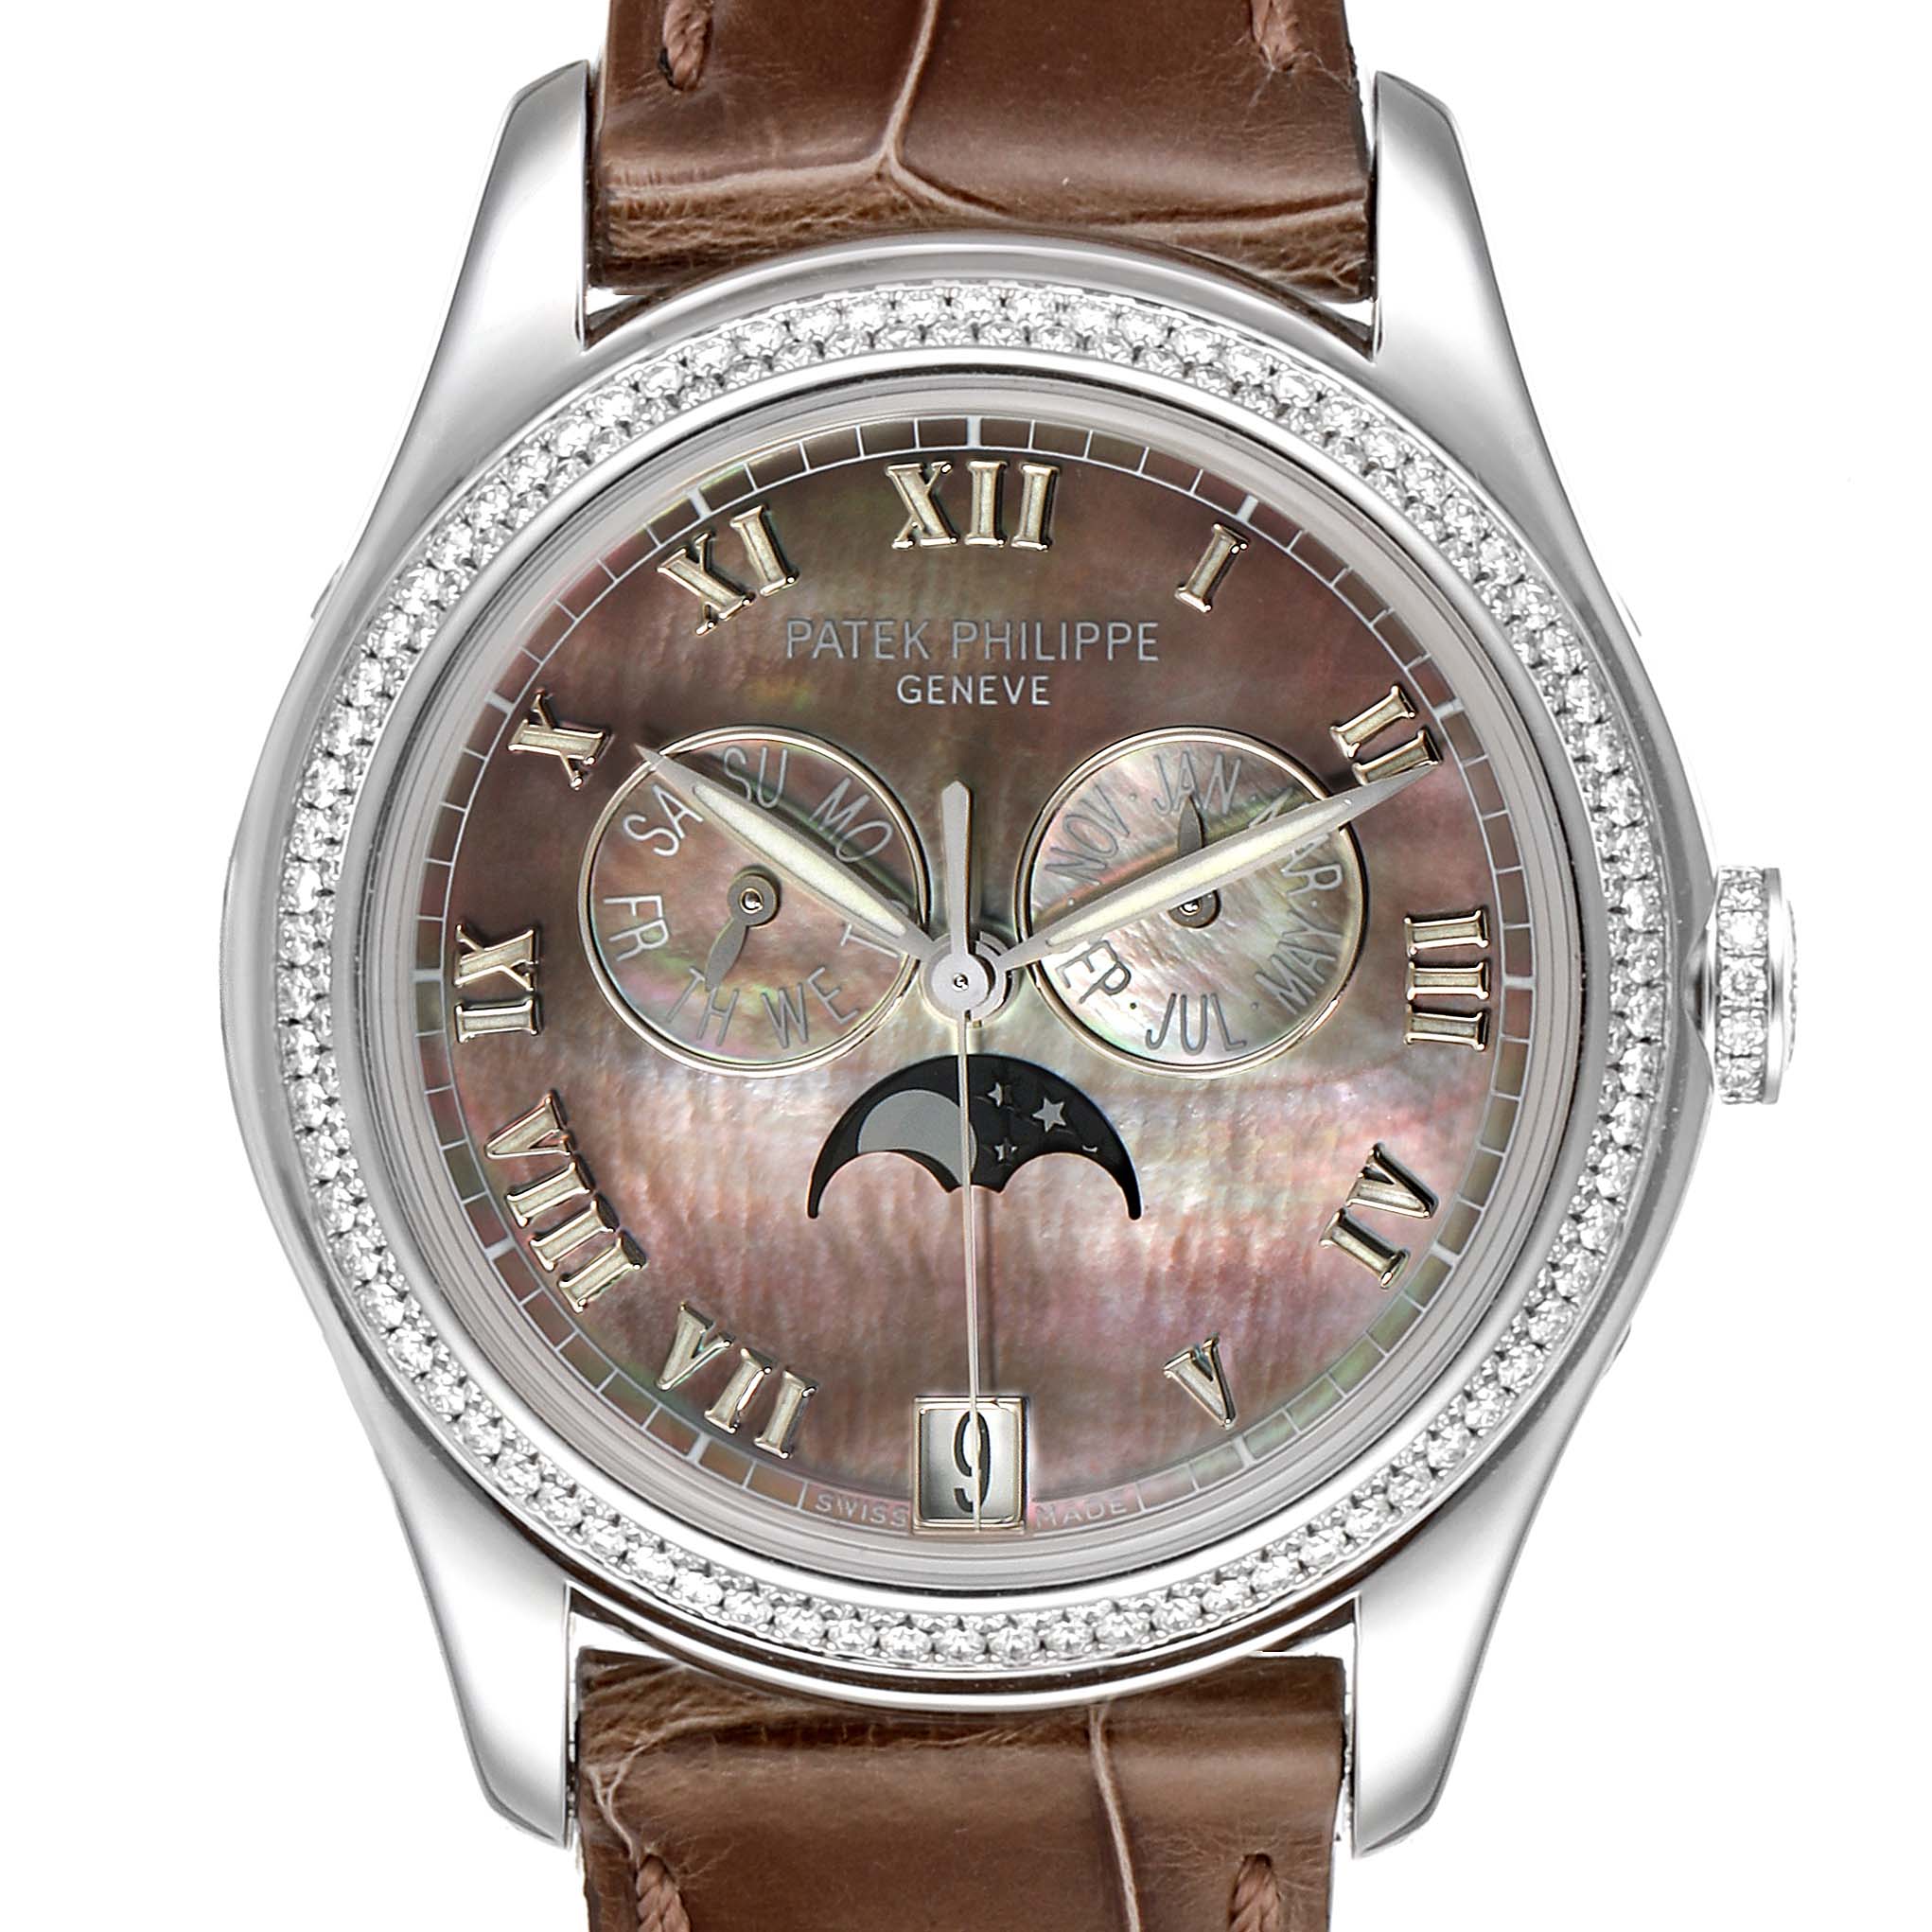 PATEK PHILIPPE, REF. 5055G, A FINE 18K WHITE GOLD WRISTWATCH WITH MOON  PHASES, DATE, AND POWER RESERVE